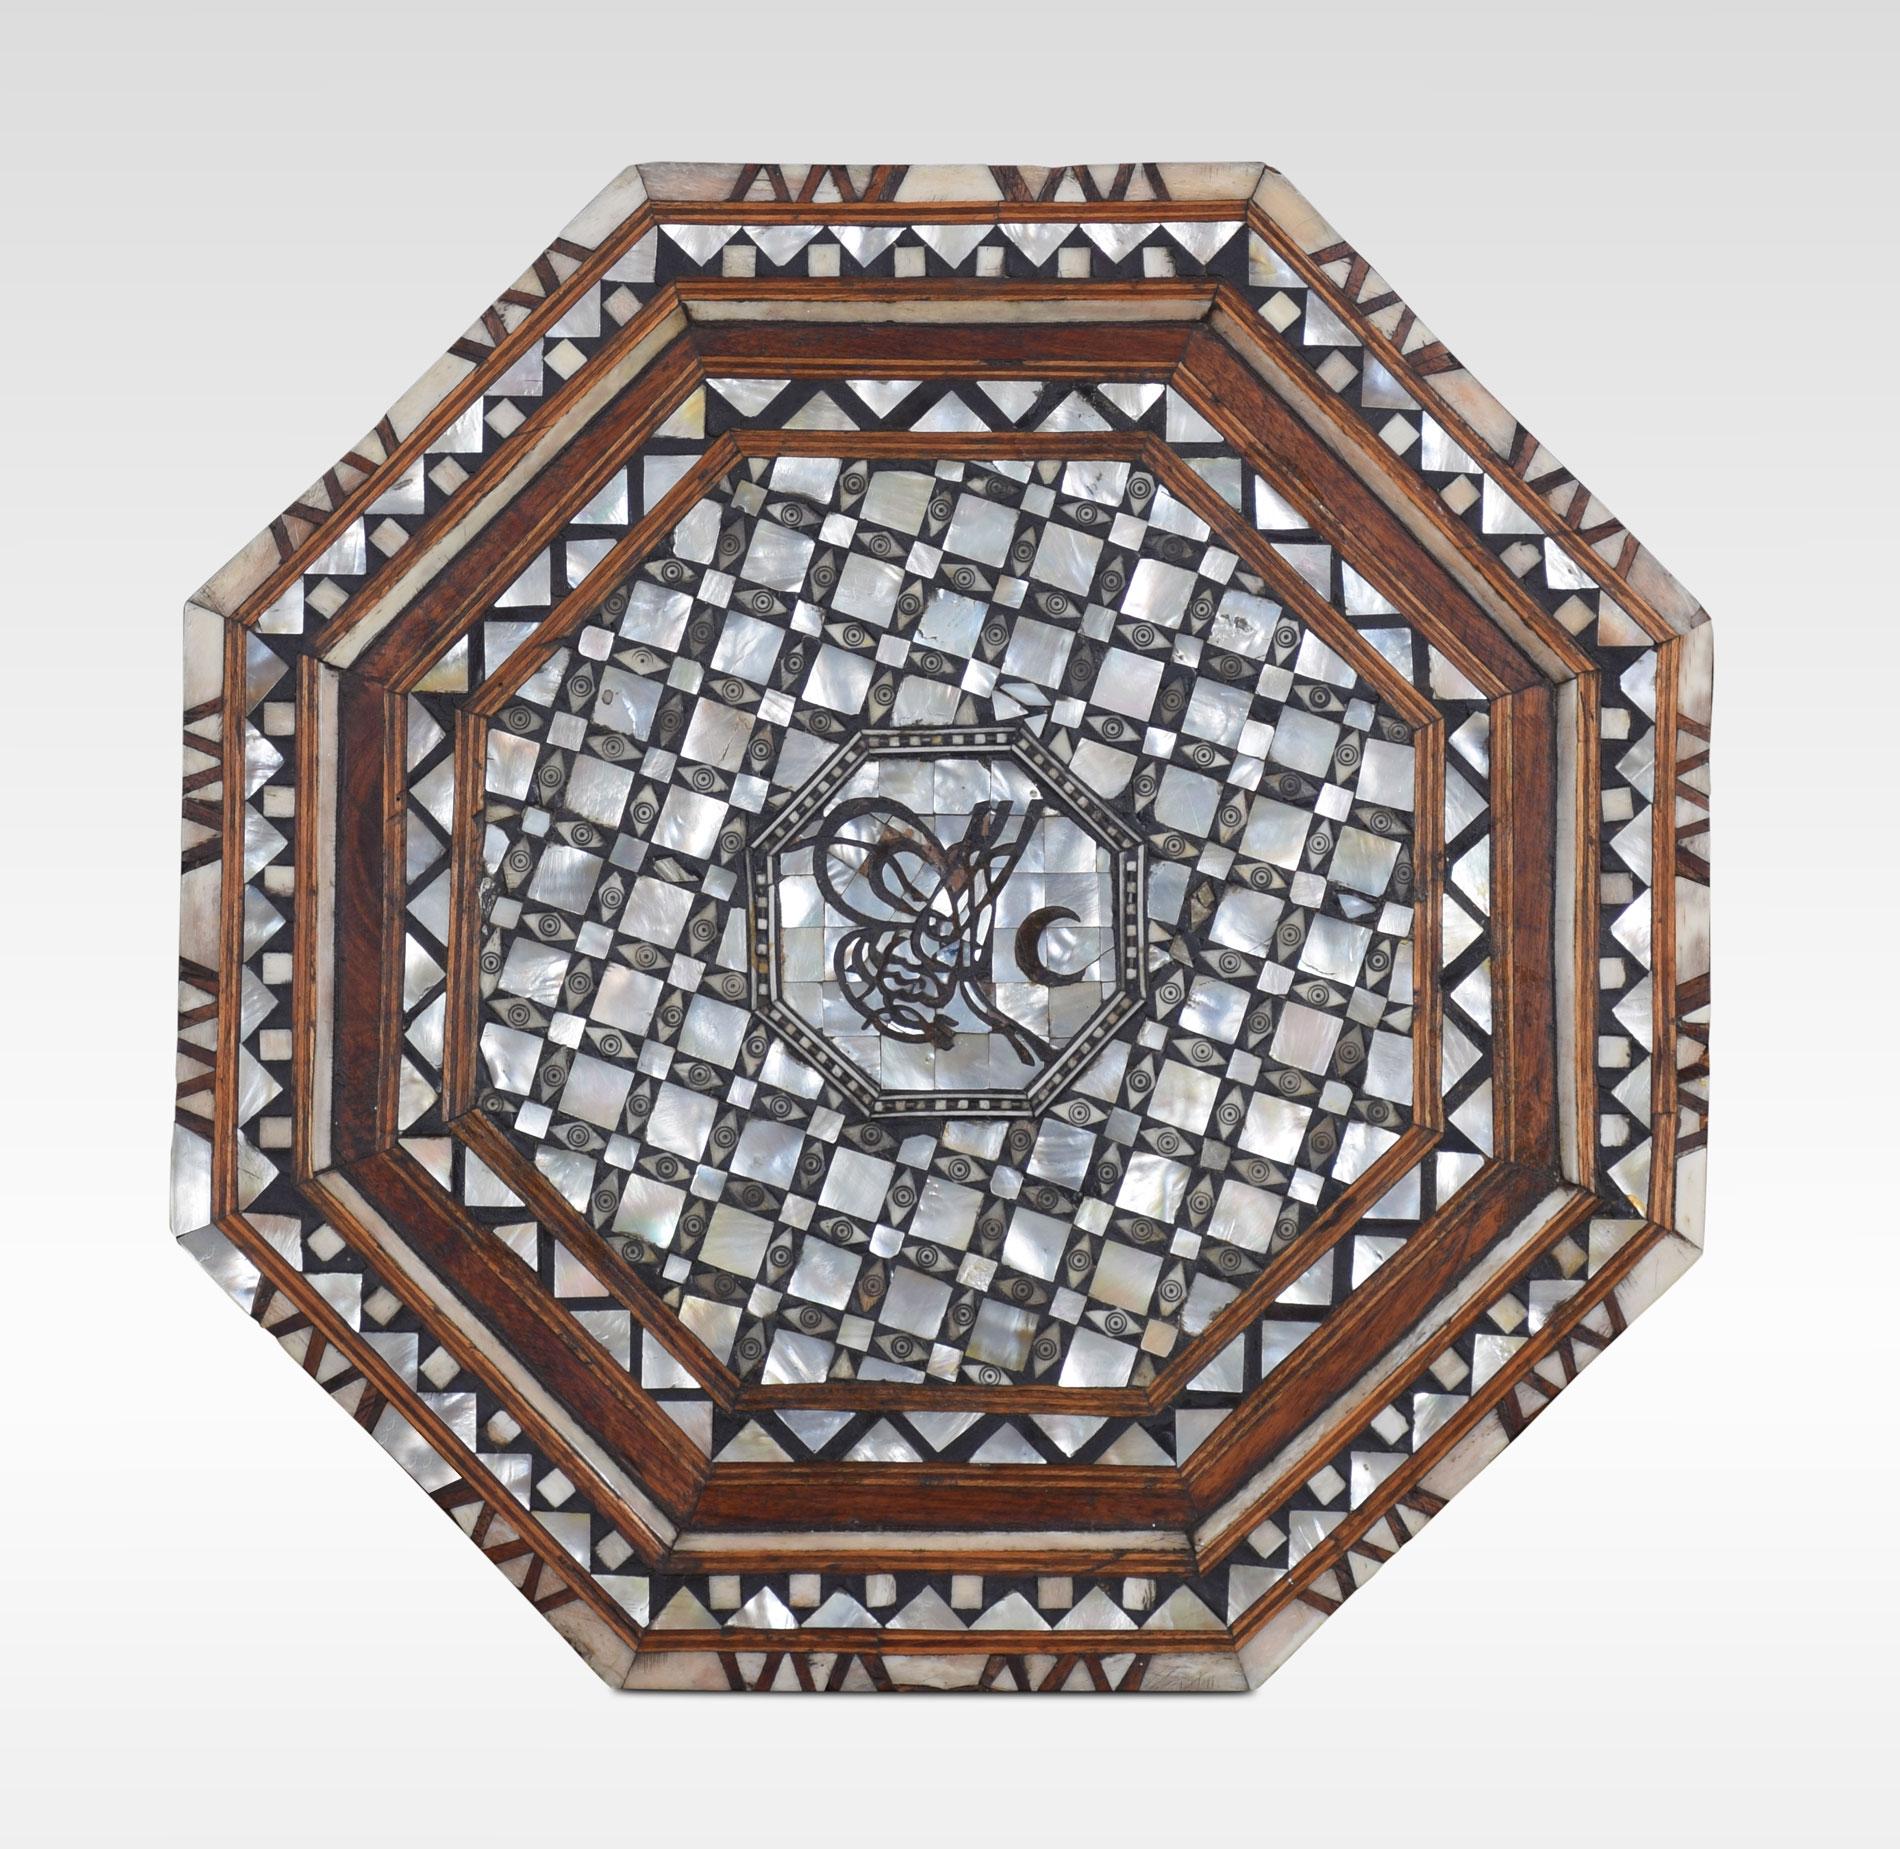 Moorish bone and mother of pearl inlaid hardwood occasional table, the octagonal top above a conforming stand with a geometric design, inlaid throughout with mother of pearl and bone.

Dimensions:
Height 20 inches
Length 18 inches
Width 18